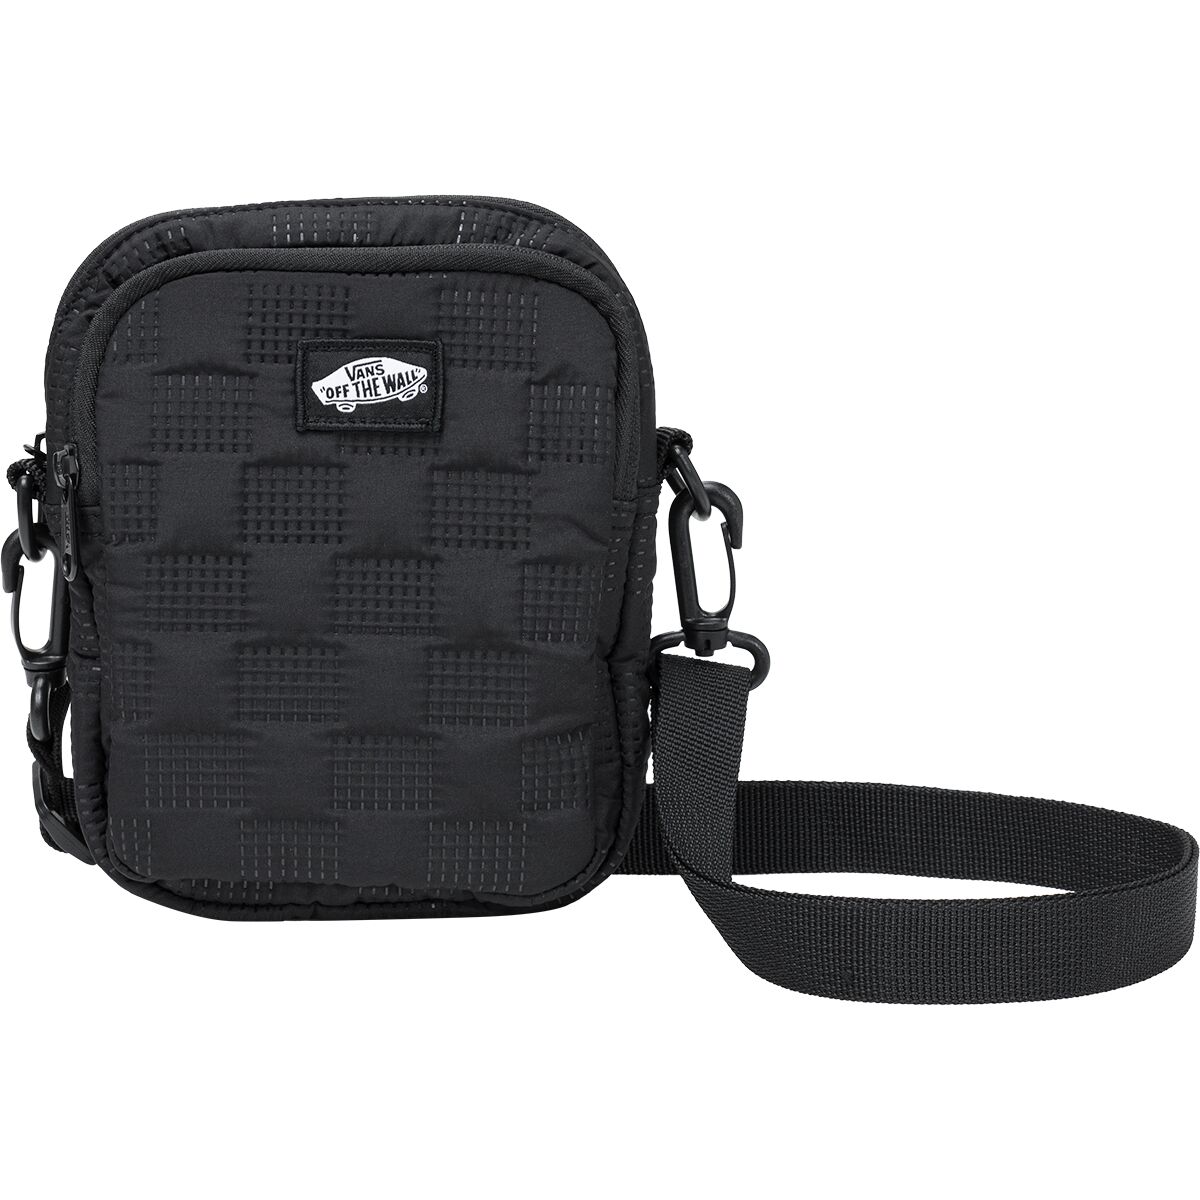 Vans Quilted Go Getter Crossbody Purse